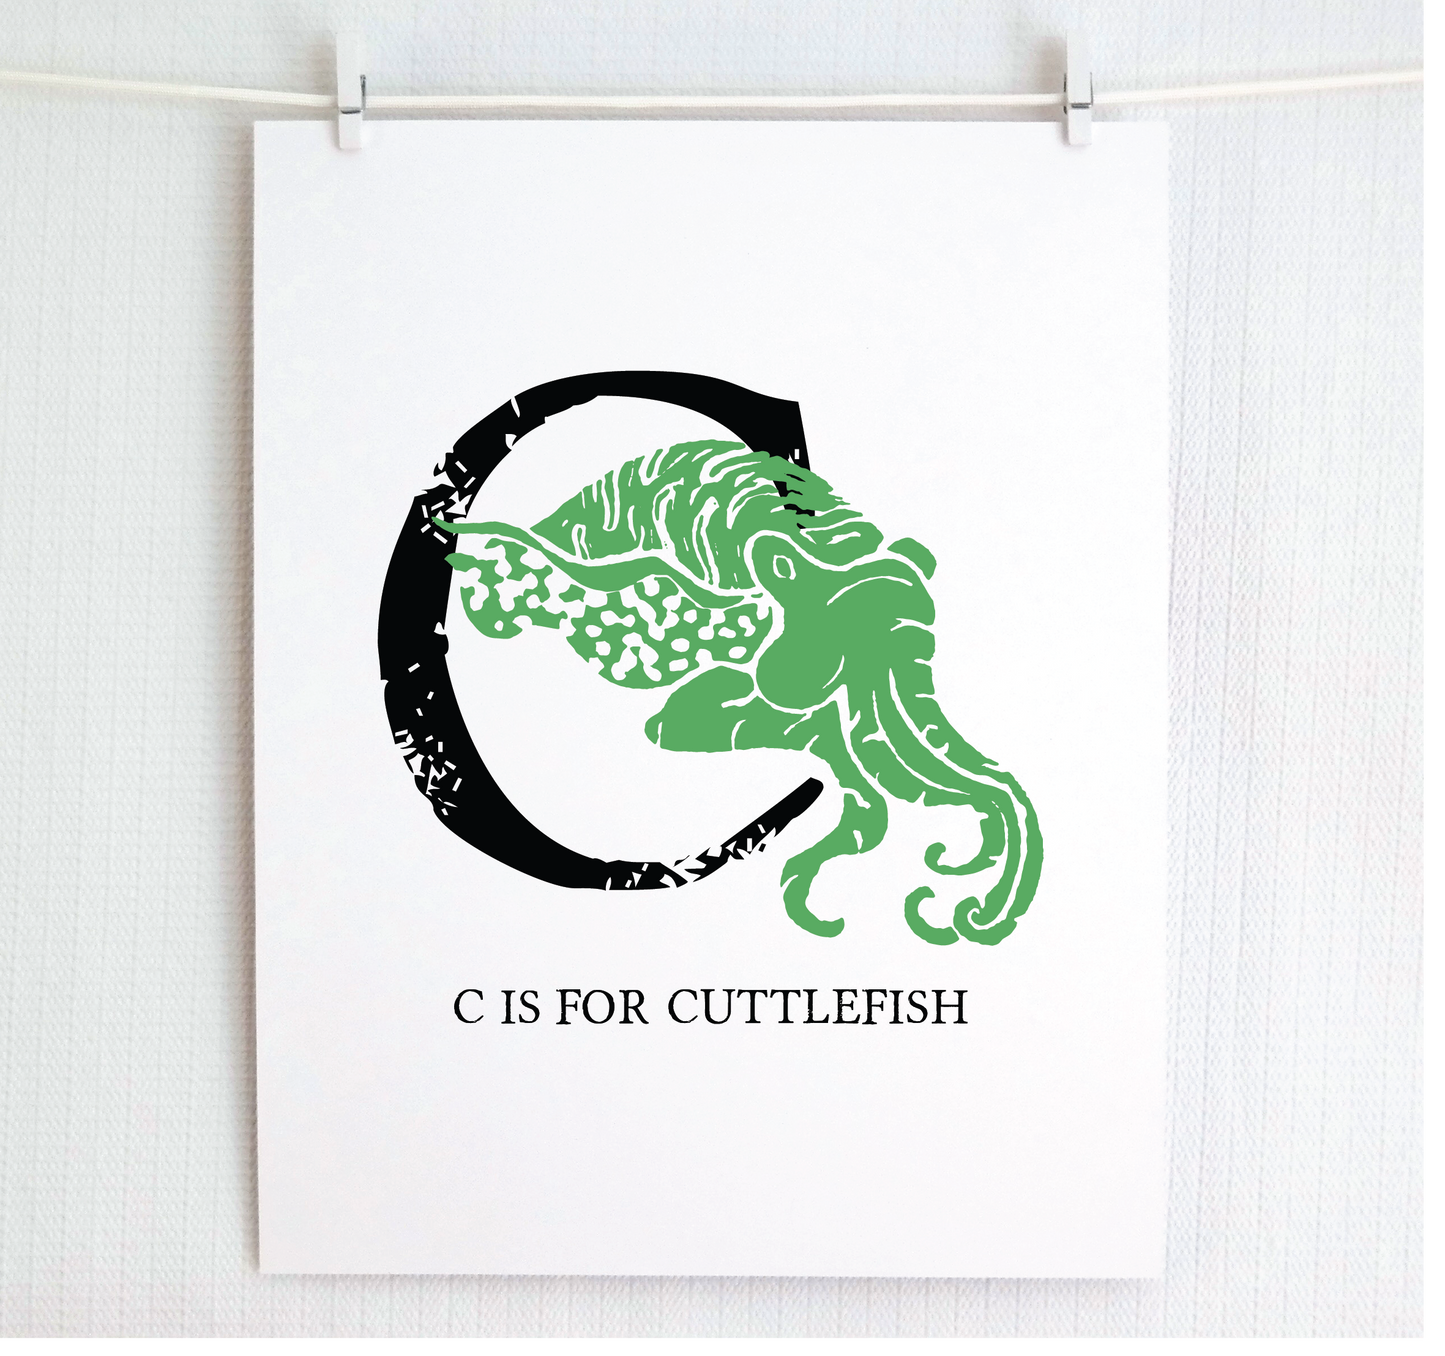 C is for Cuttlefish